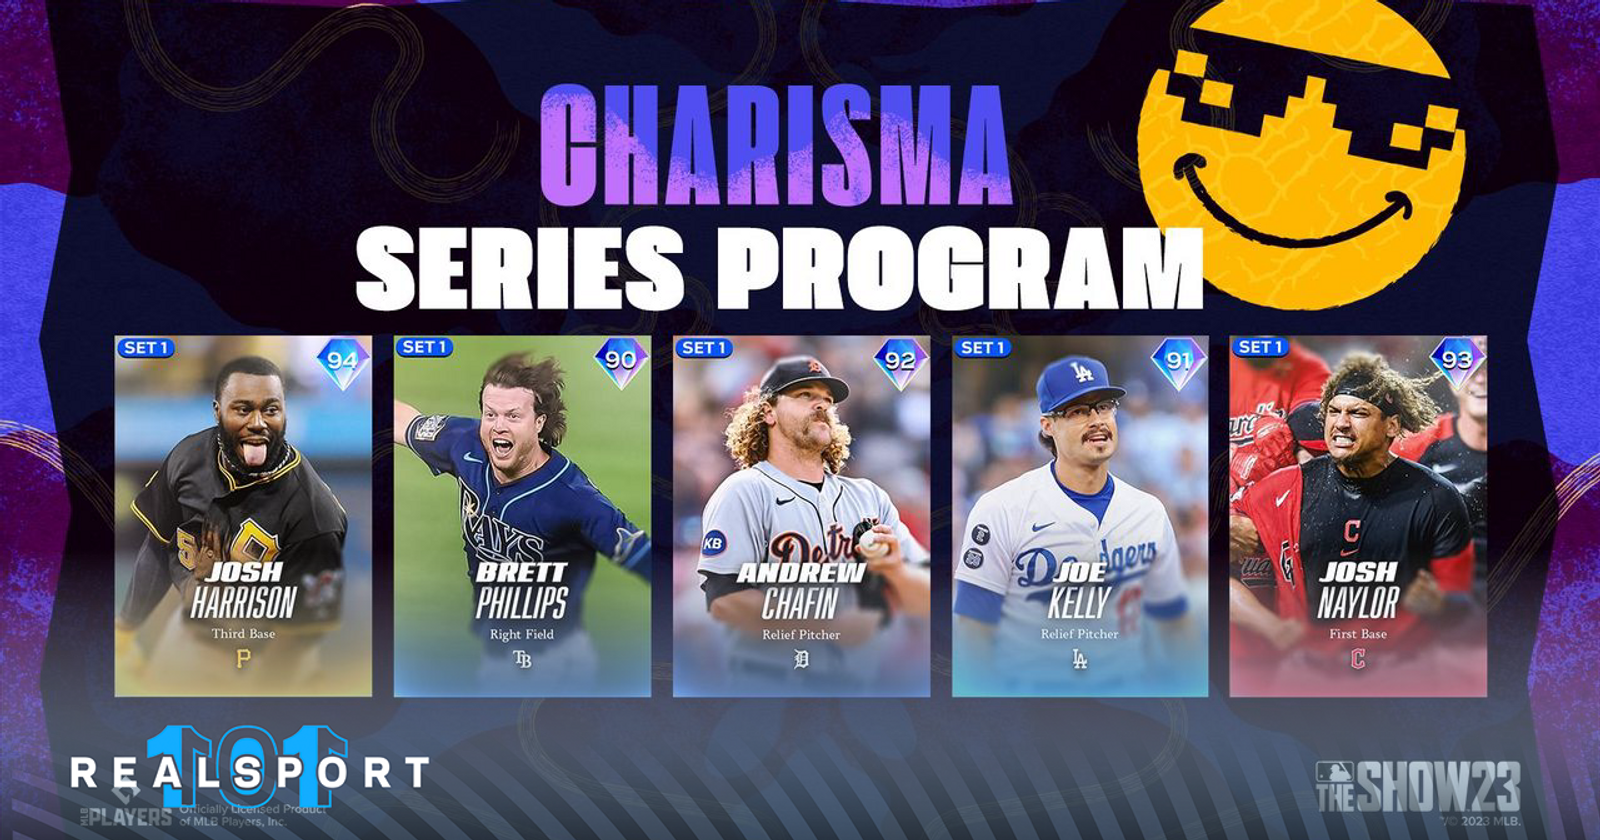 MLB The Show 23 Guide: How To Get Player Cards In Diamond Dynasty